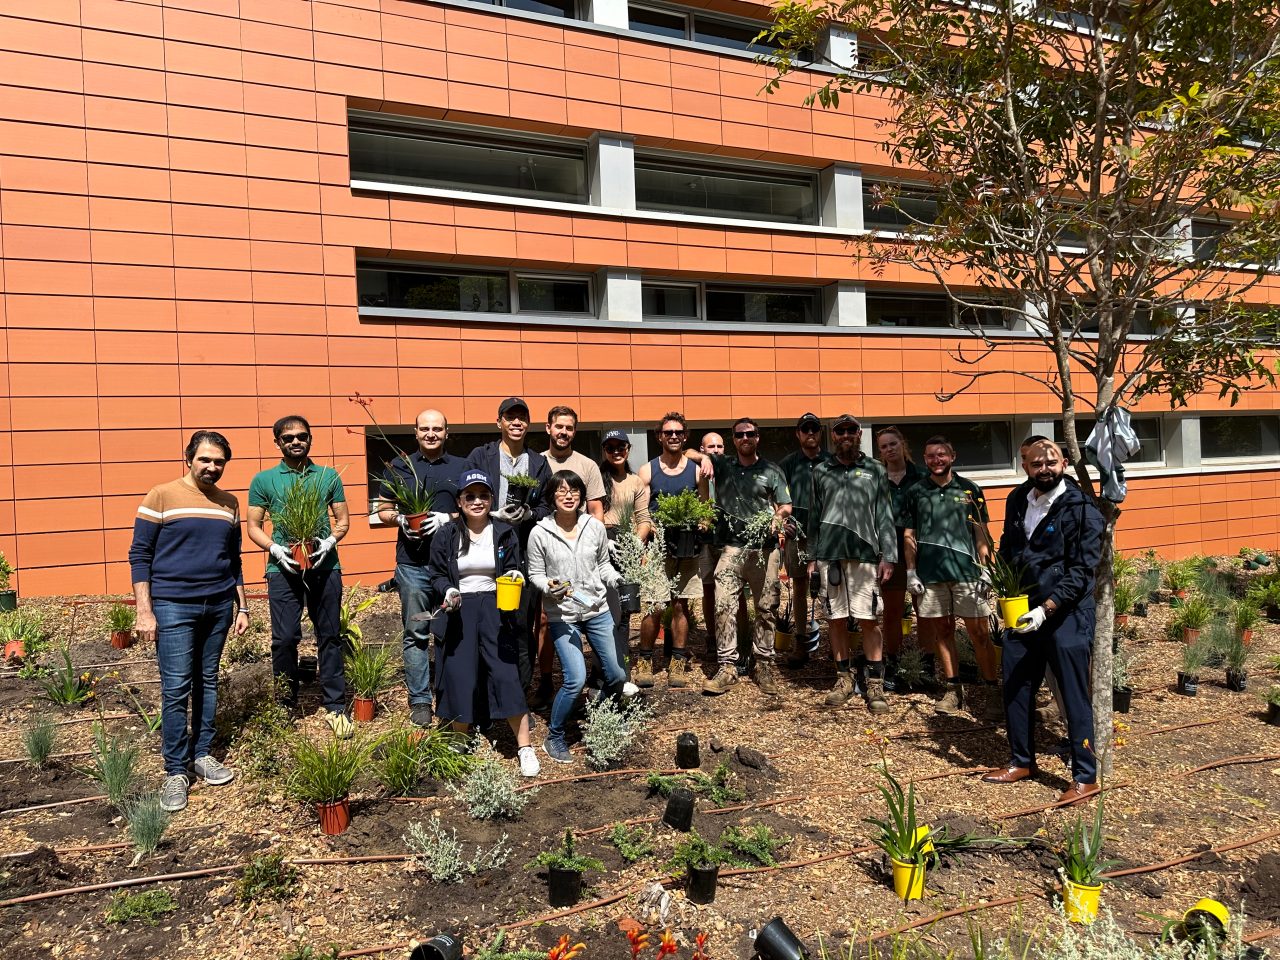 MBA and HDR Business School Student Volunteers helped the UNSW Landscaping team plant 1,200 plants alongside the Red Centre.